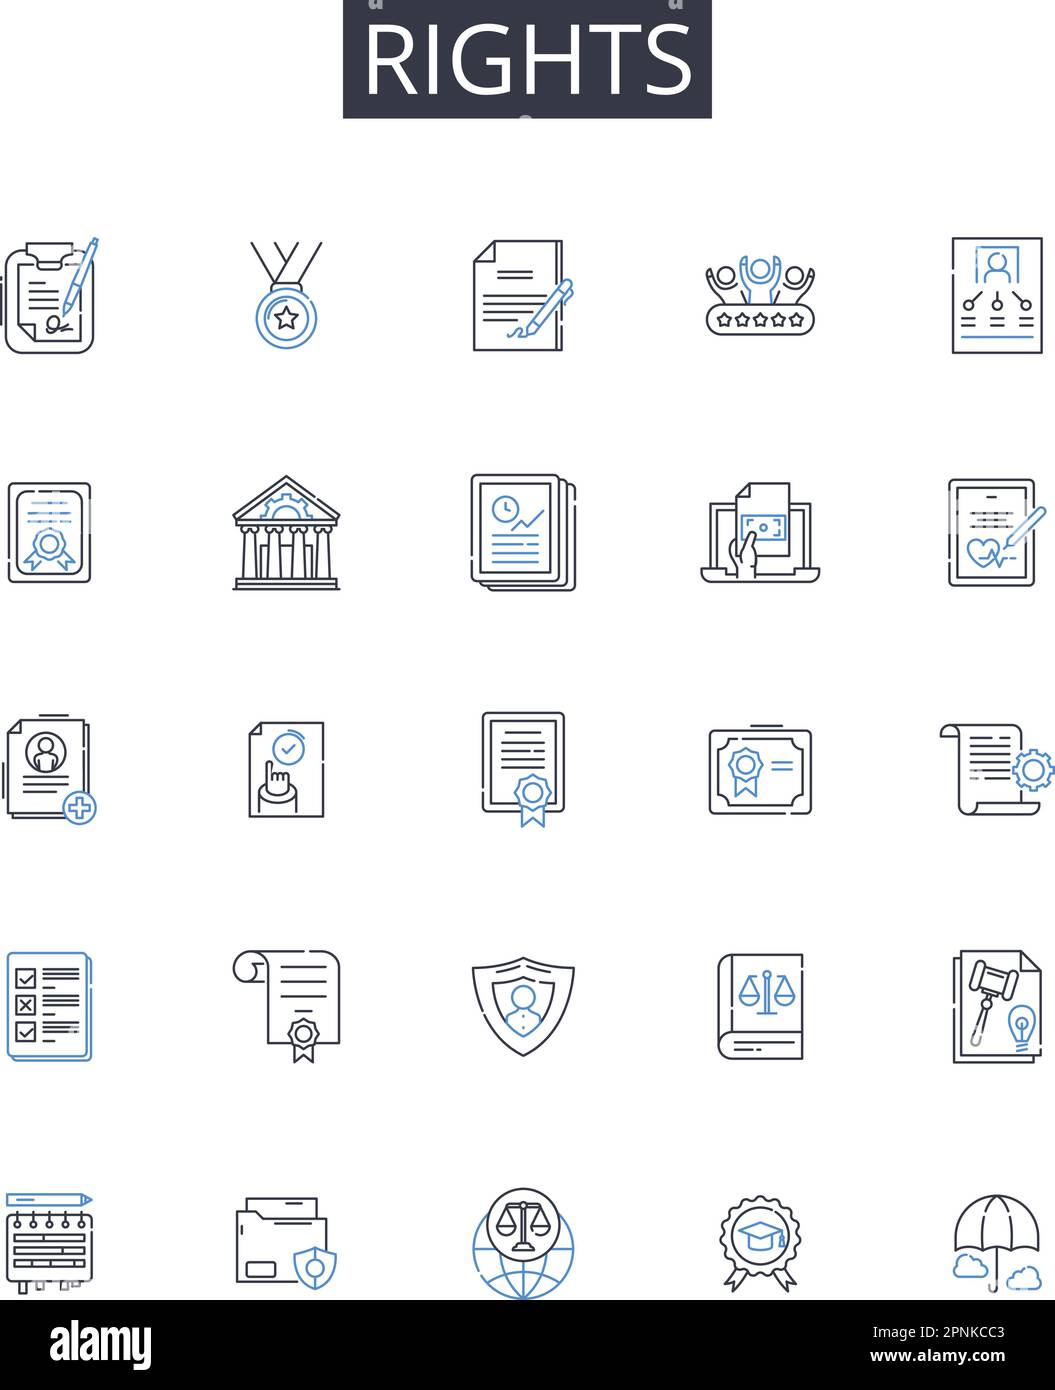 Rights line icons collection. Orbital, Transponder, Uplink, Downlink, Antenna, Radiation, Attitude vector and linear illustration. Radiofrequency Stock Vector